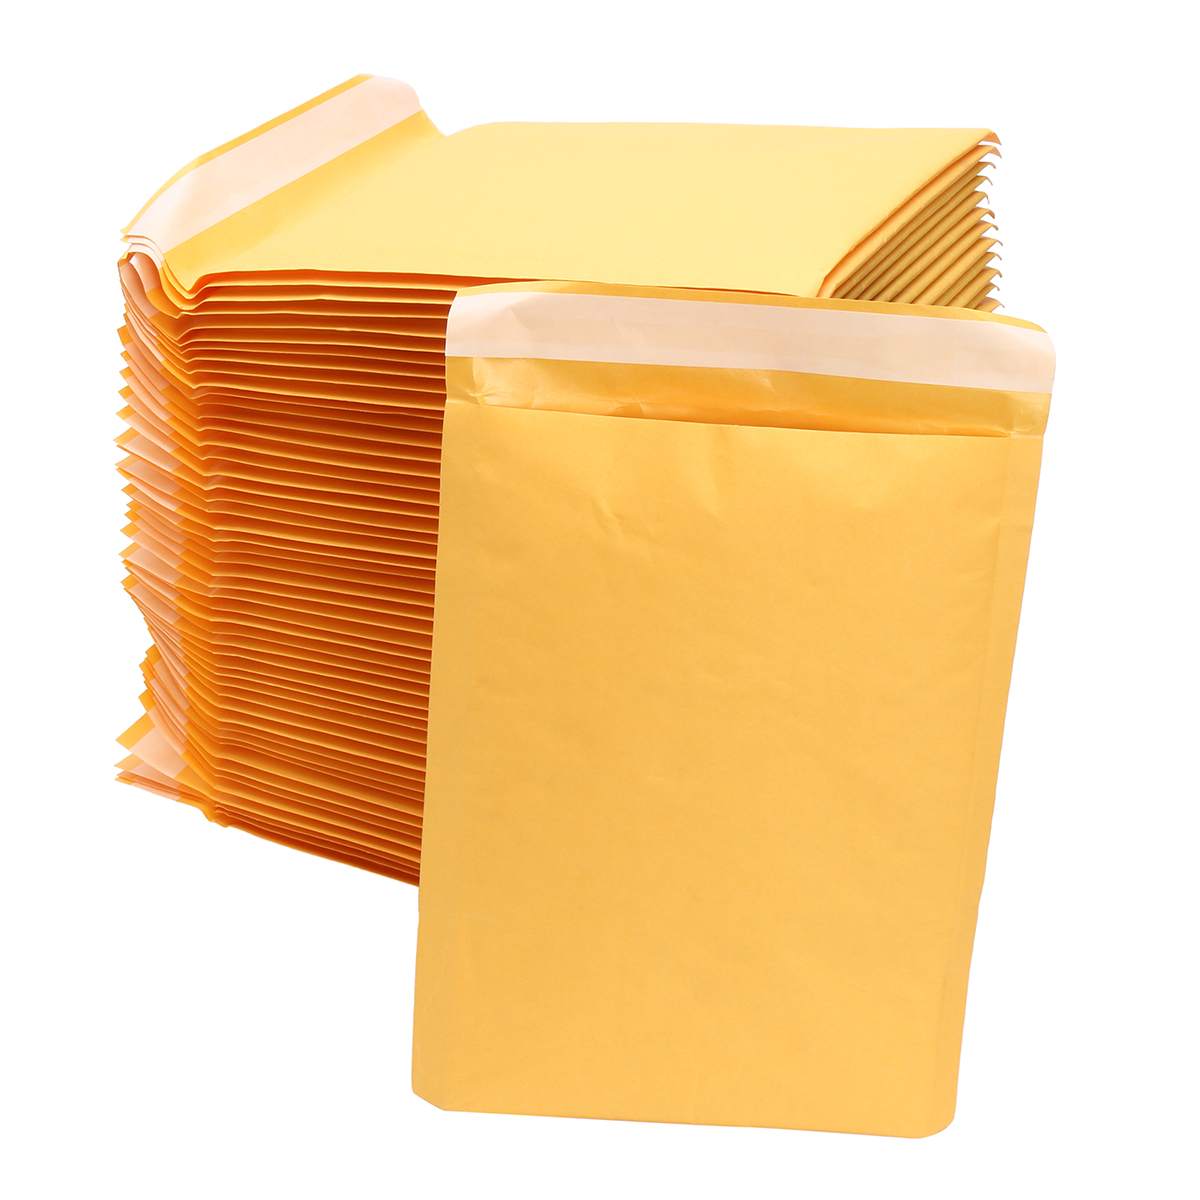 

50Pcs Kraft Paper Bubble Mailers Padded Envelopes Self Seal Shipping Bags Lot Yellow